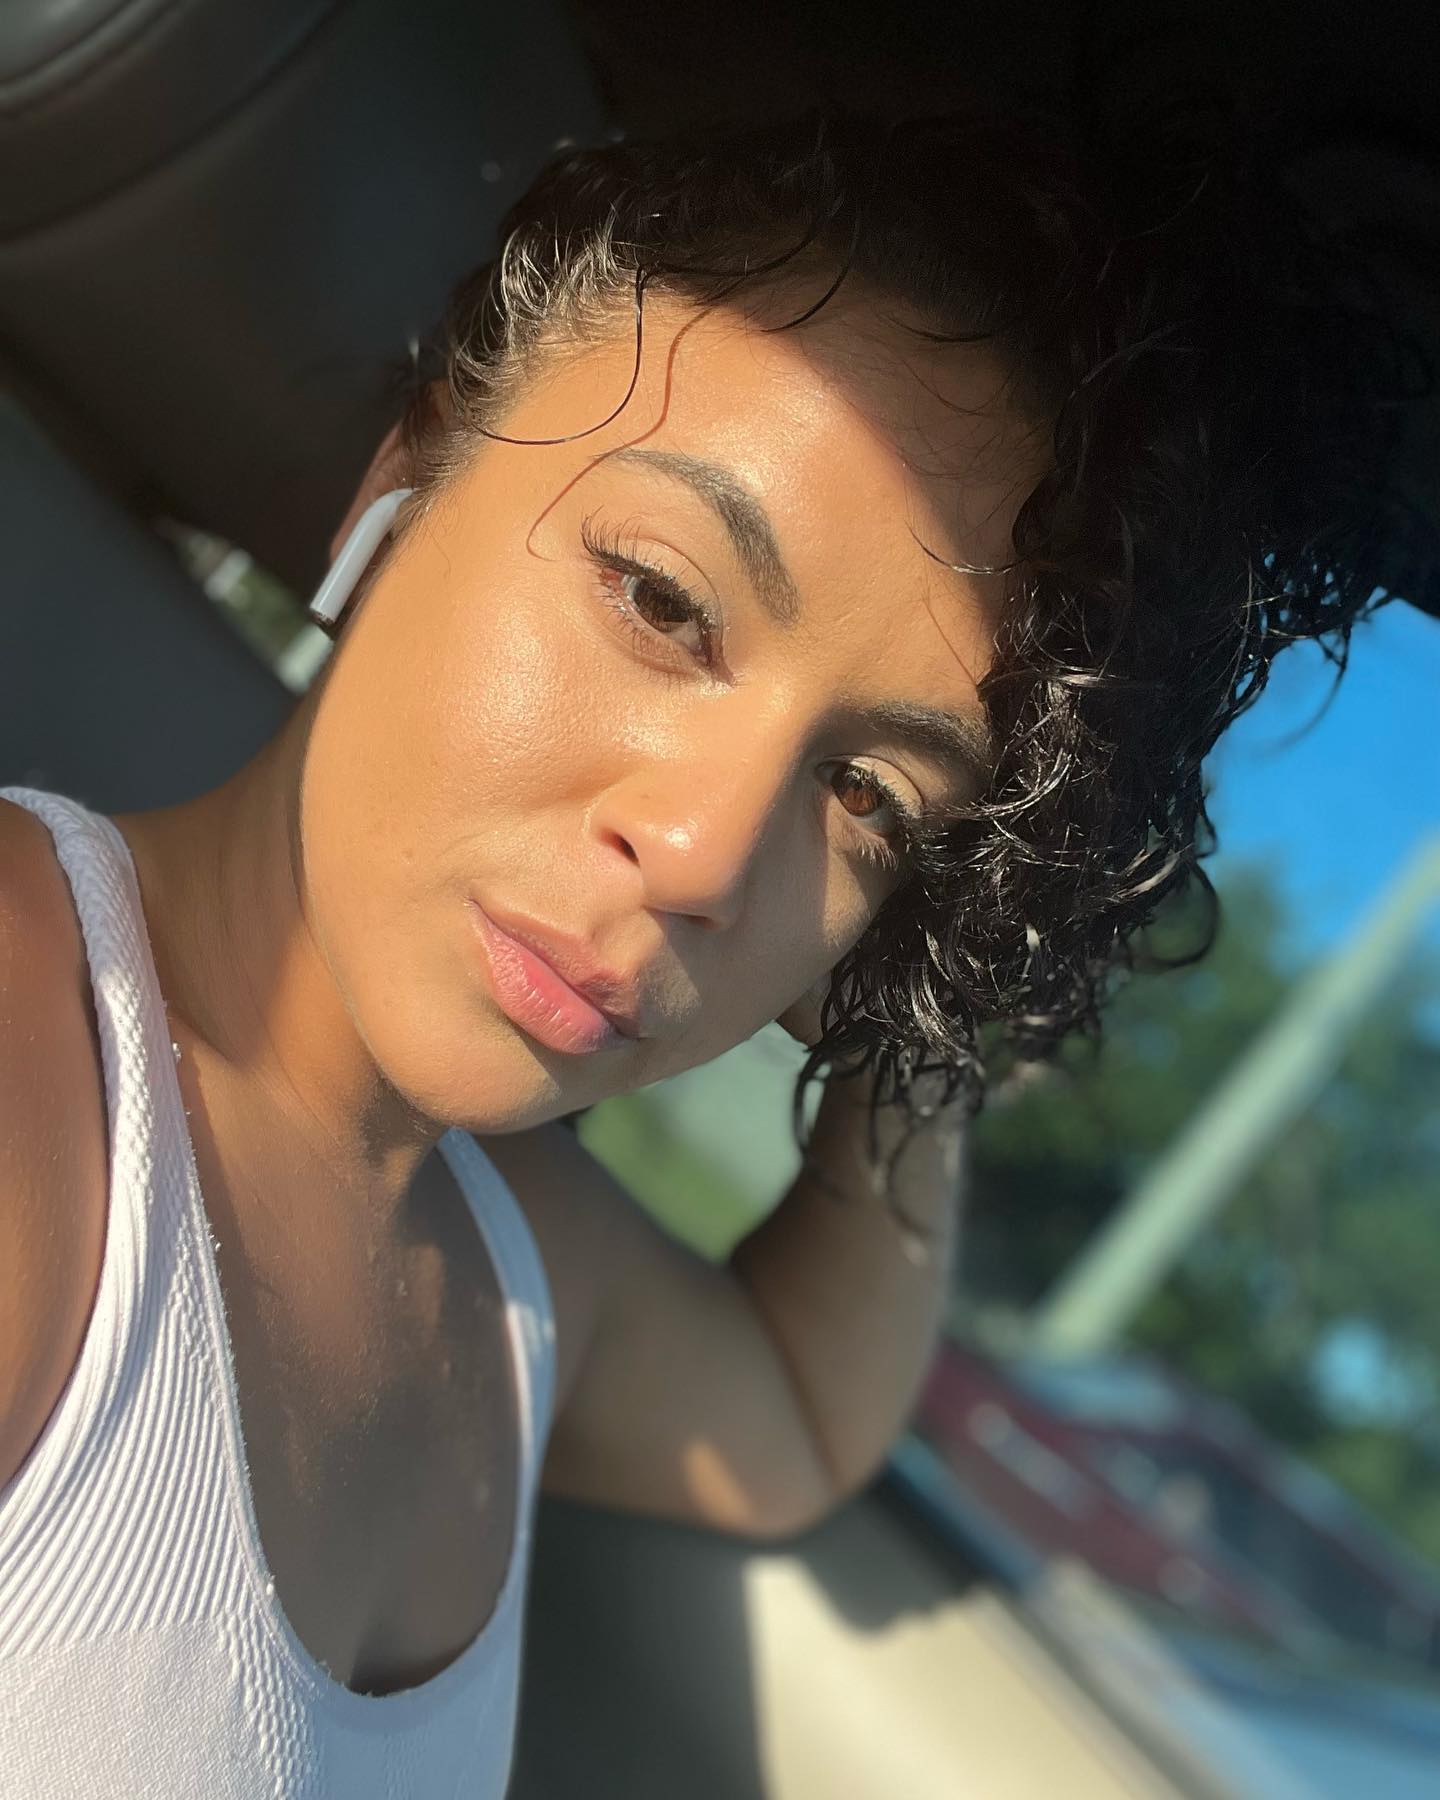 I put make up on yesterday and the sun did me all the justice ☀️✨